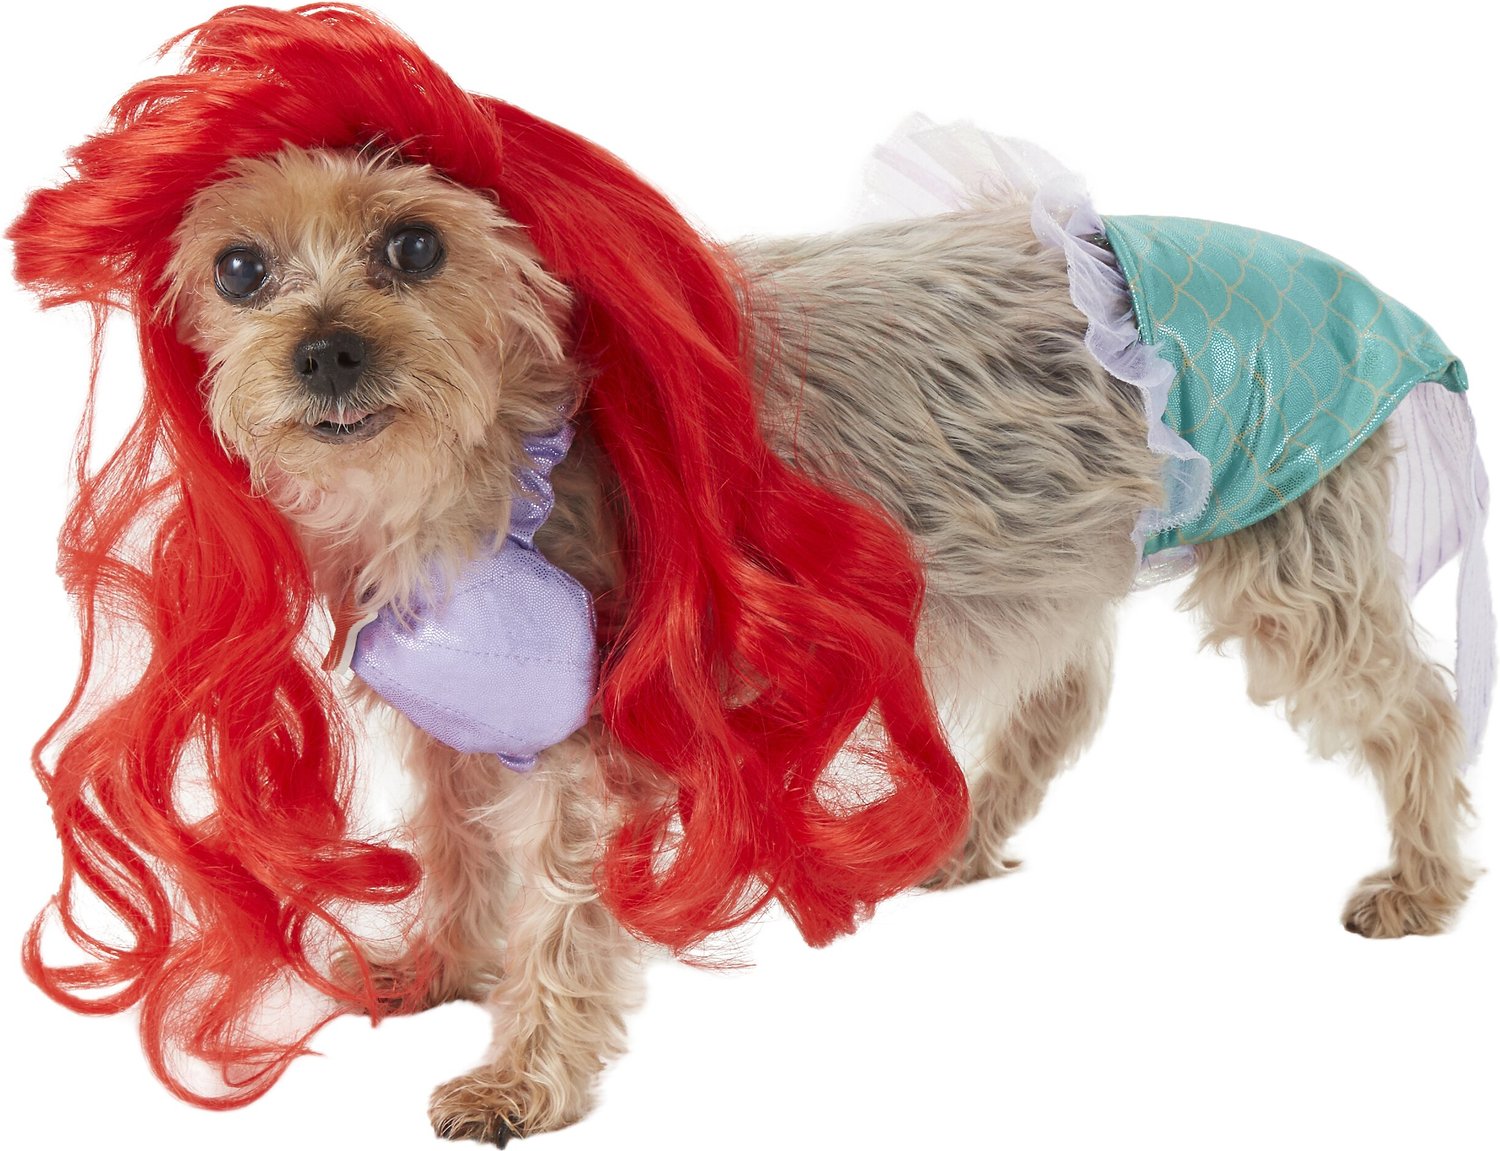 Disney for Pets Halloween Disney Princess Ariel Costume - Extra Small - |  Disney Princess Halloween Costumes for Dogs, Officially Licensed Disney Dog